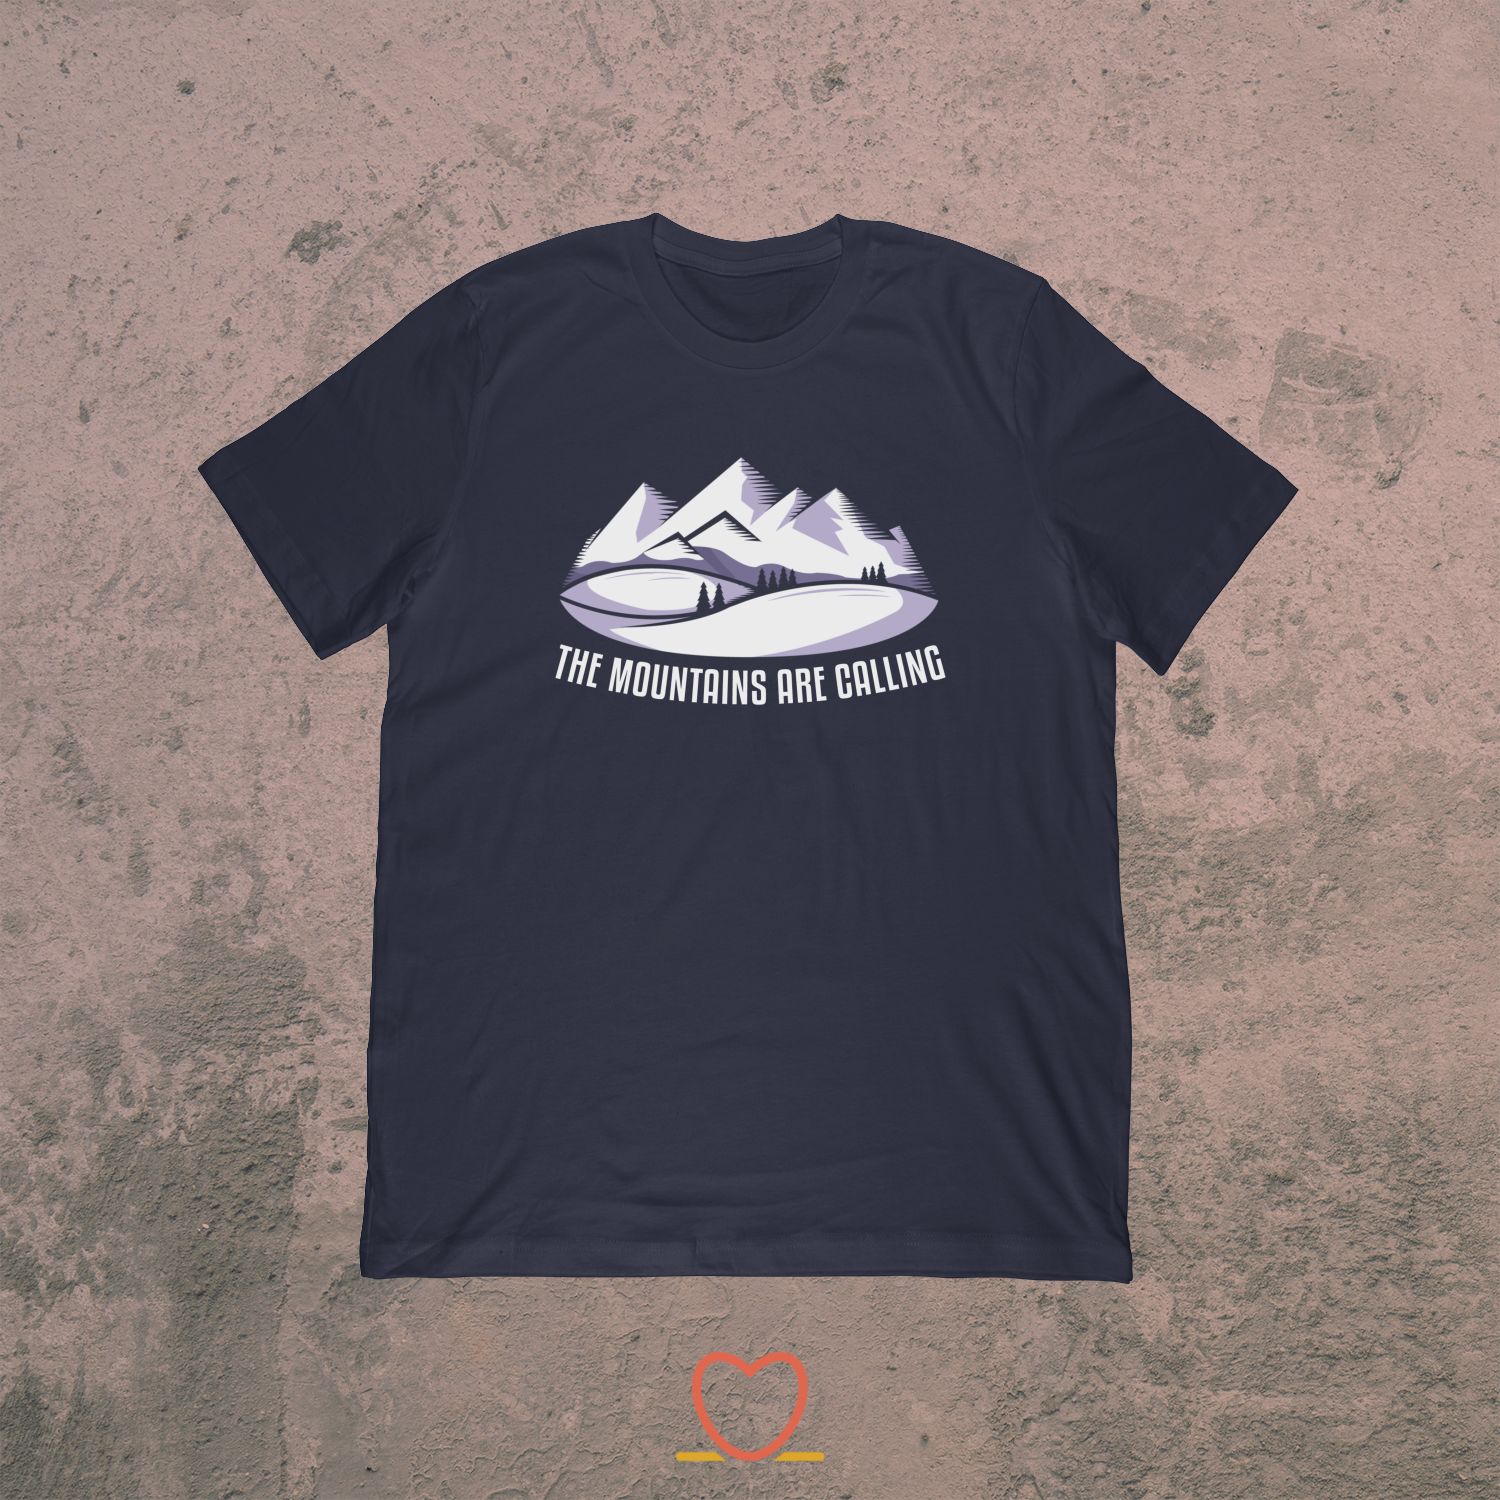 The Mountains Are Calling – Let’s Go Skiing Tee